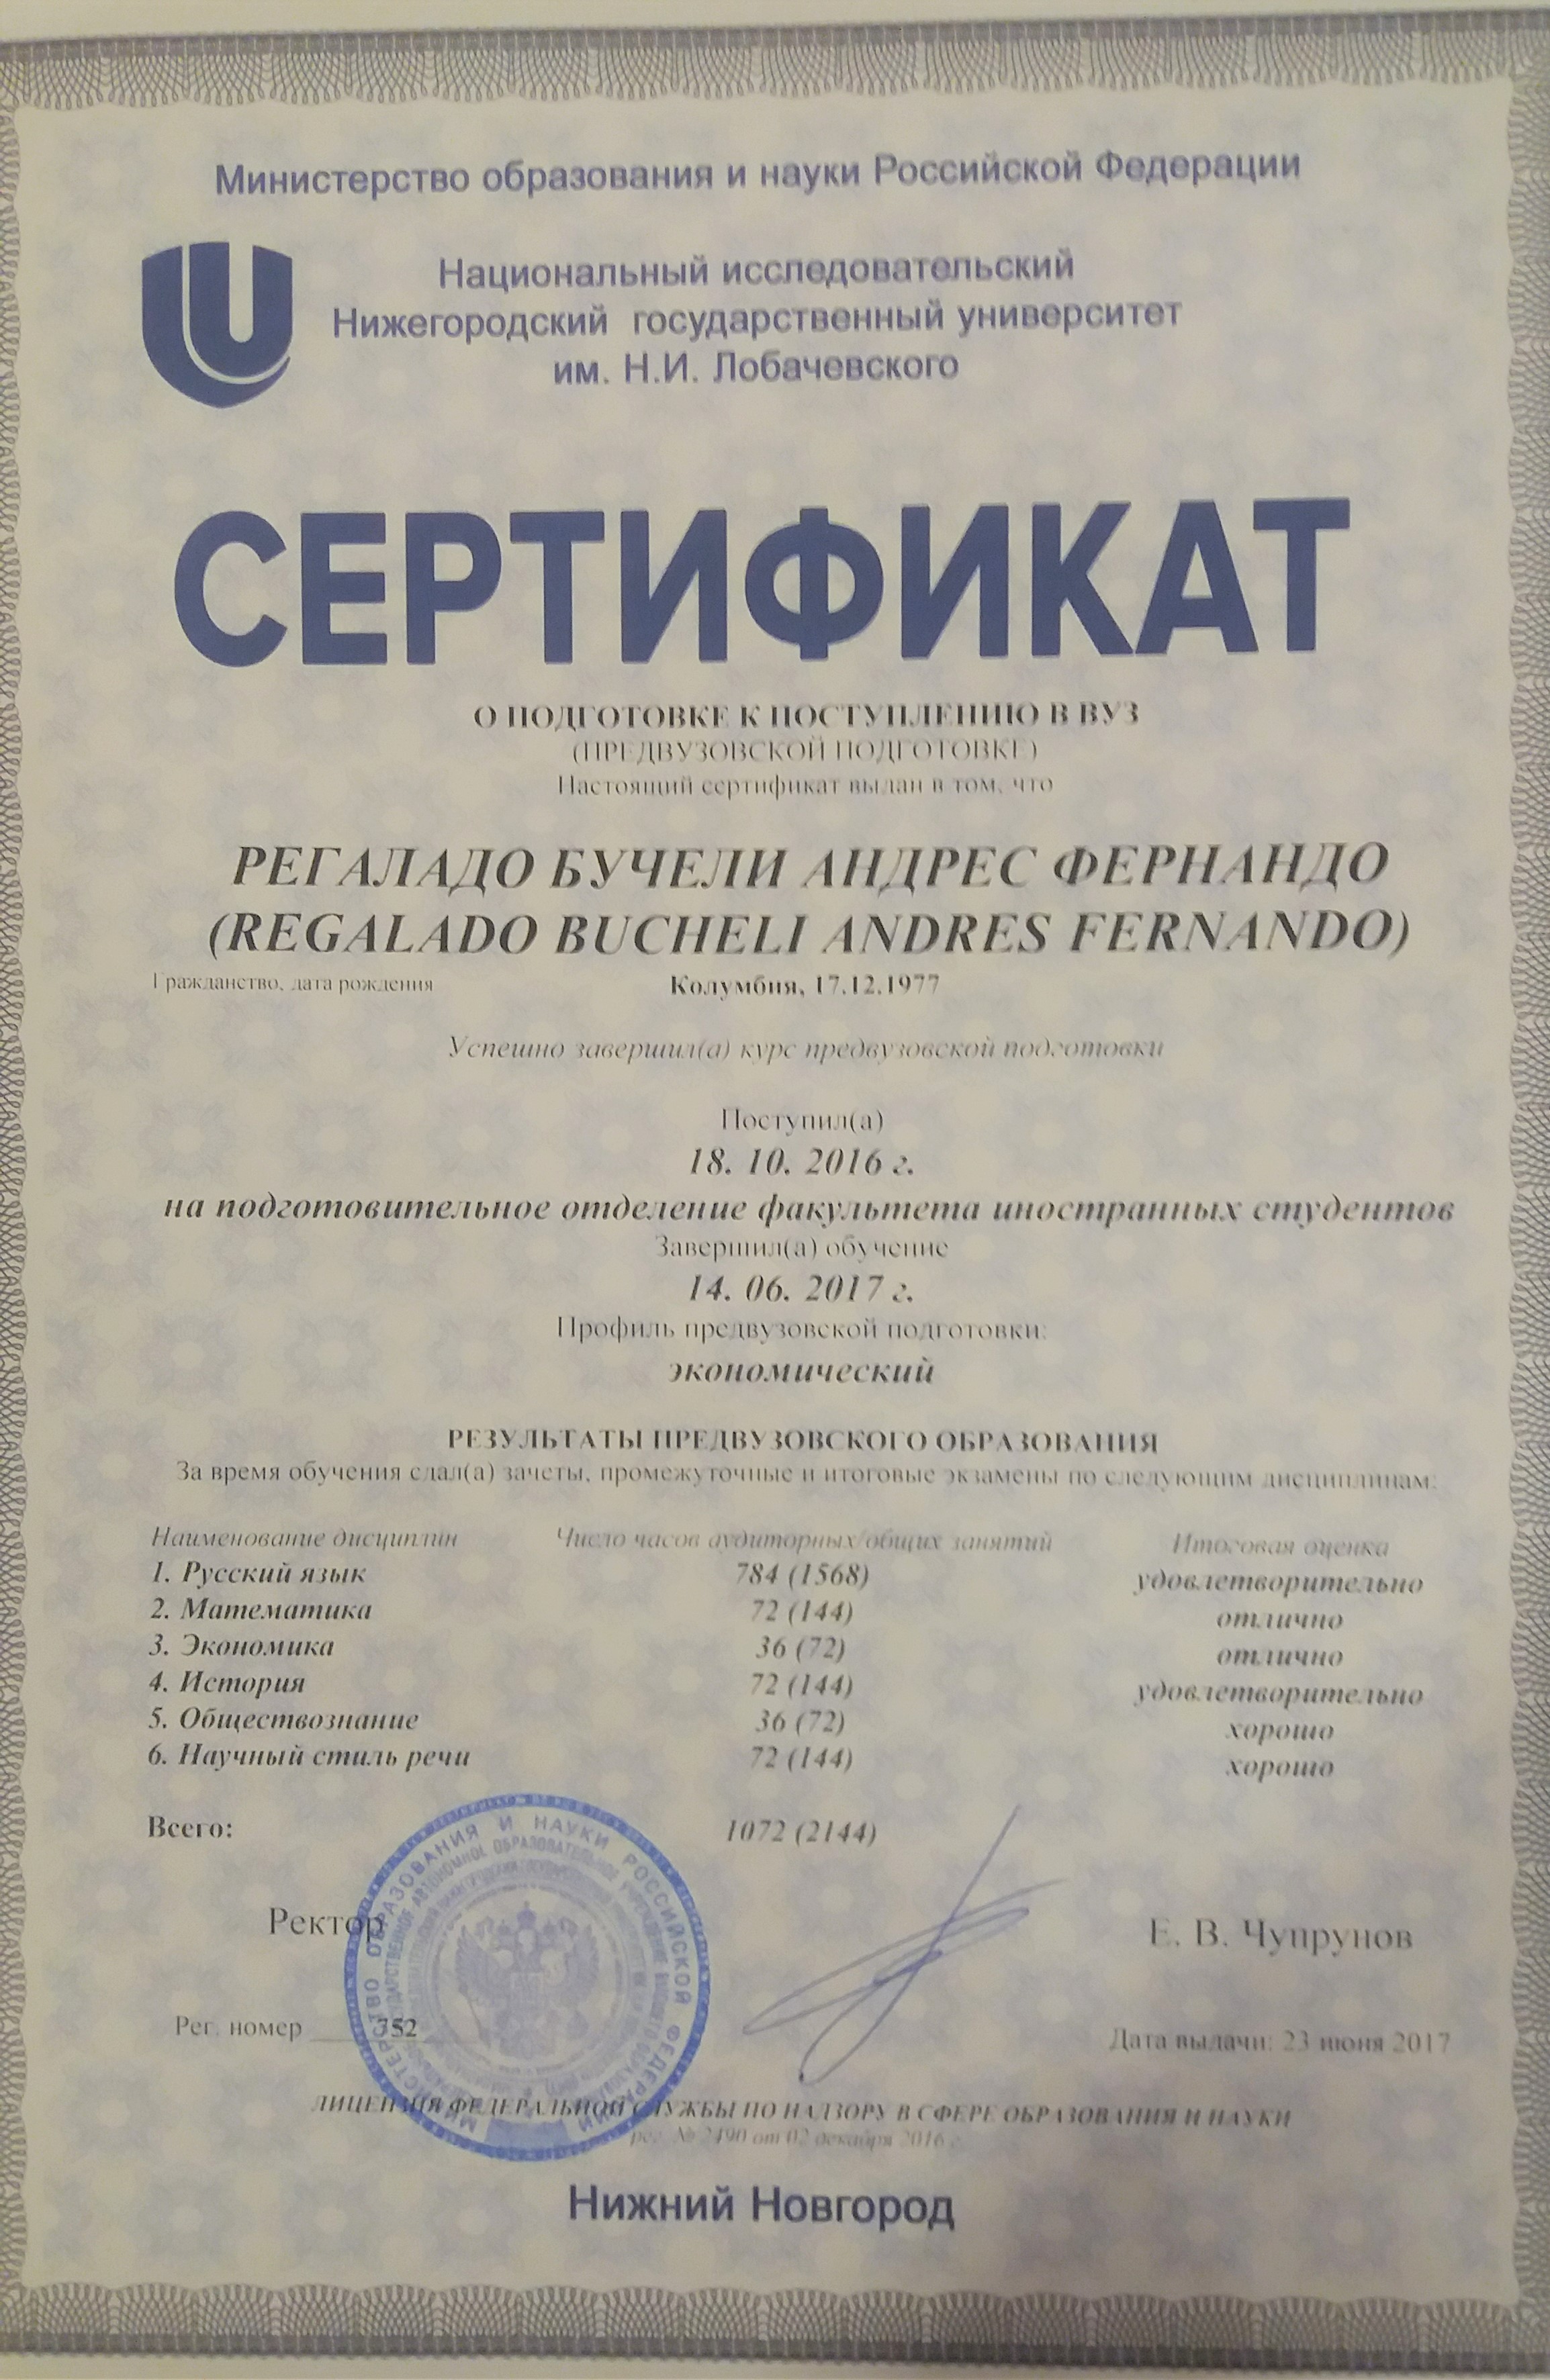 Photo of certificate